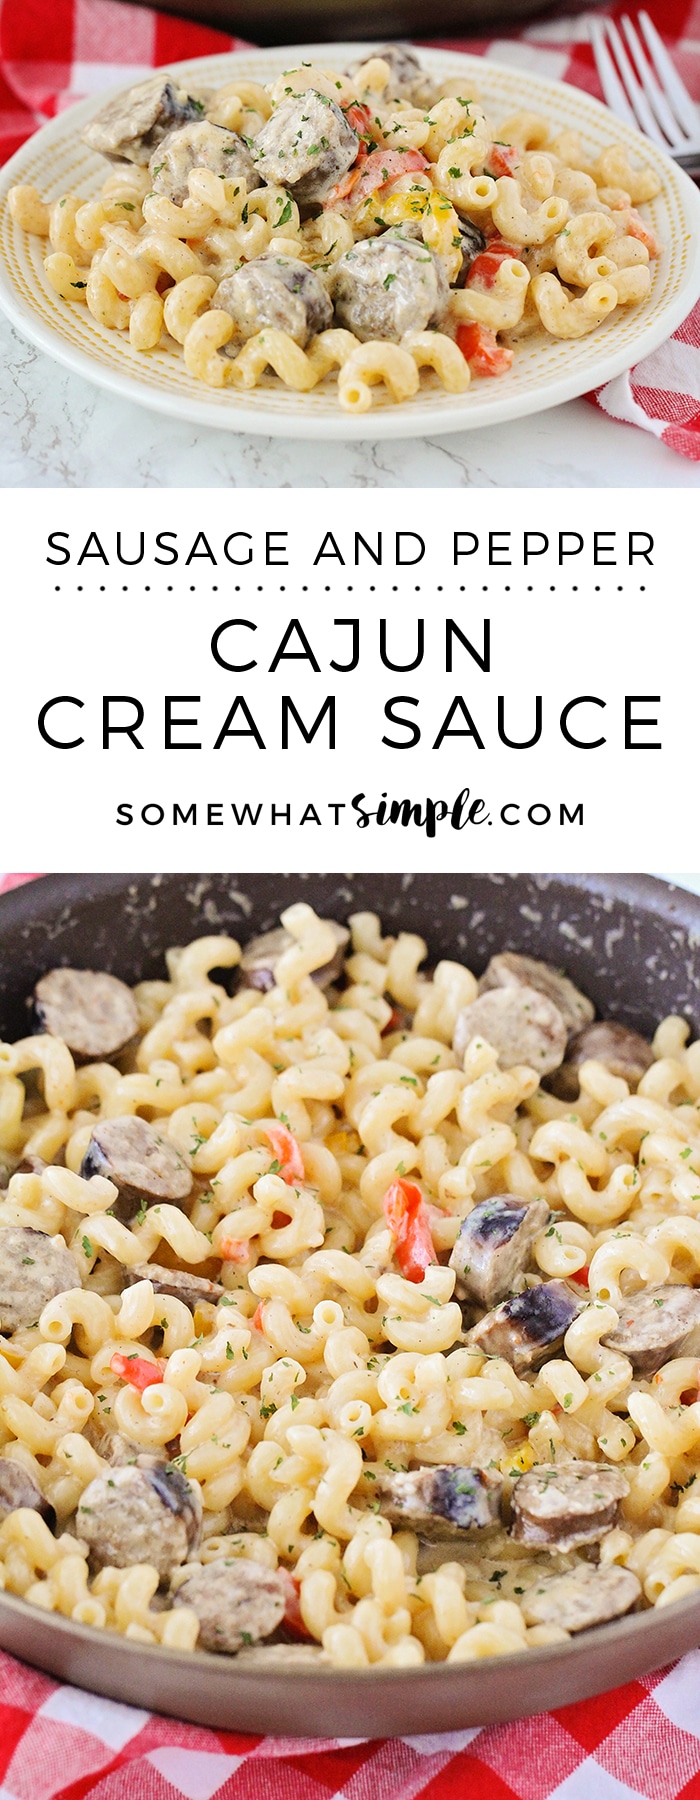 This rich and creamy cajun cream sauce pasta is a quick and easy recipe to prepare. Loaded with sausage and bell peppers this dinner is FULL of flavor! #cajuncreamsauce #cajuncreamsaucepasta #cajuncreamsaucepastarecipe #cajuncreamsauceforchicken #cajuncreamsauceforfish via @somewhatsimple